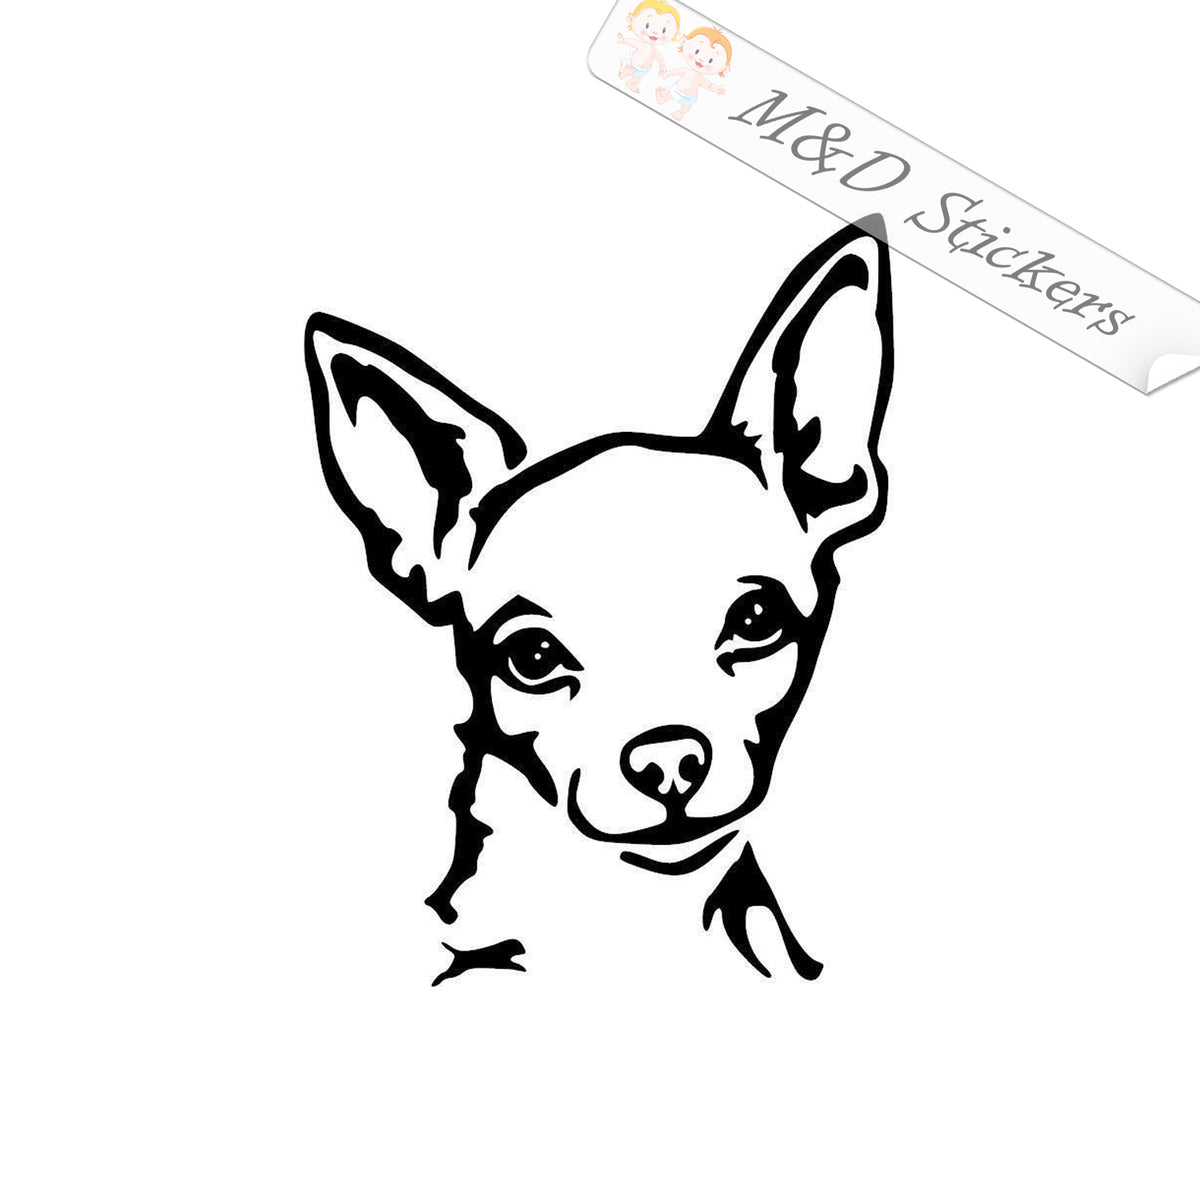 Euro Chihuahua Chihuahuas Dog Graphic Decal Sticker Car Wall Oval NOT Two Colors 